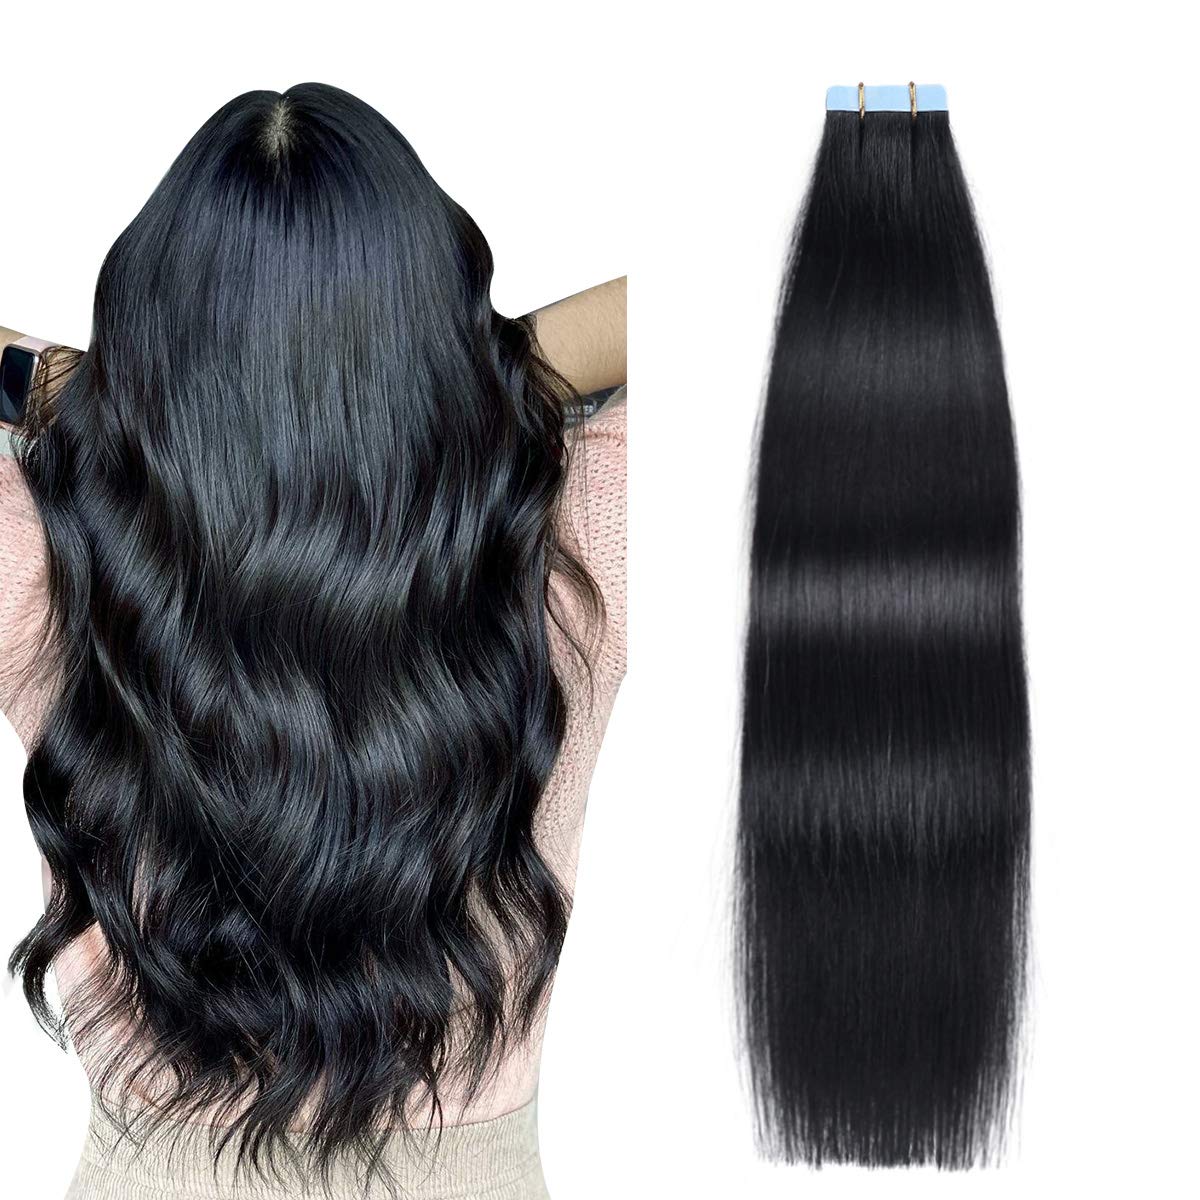 SUYYA Tape in Hair Extensions Black 100% Real Human [...]